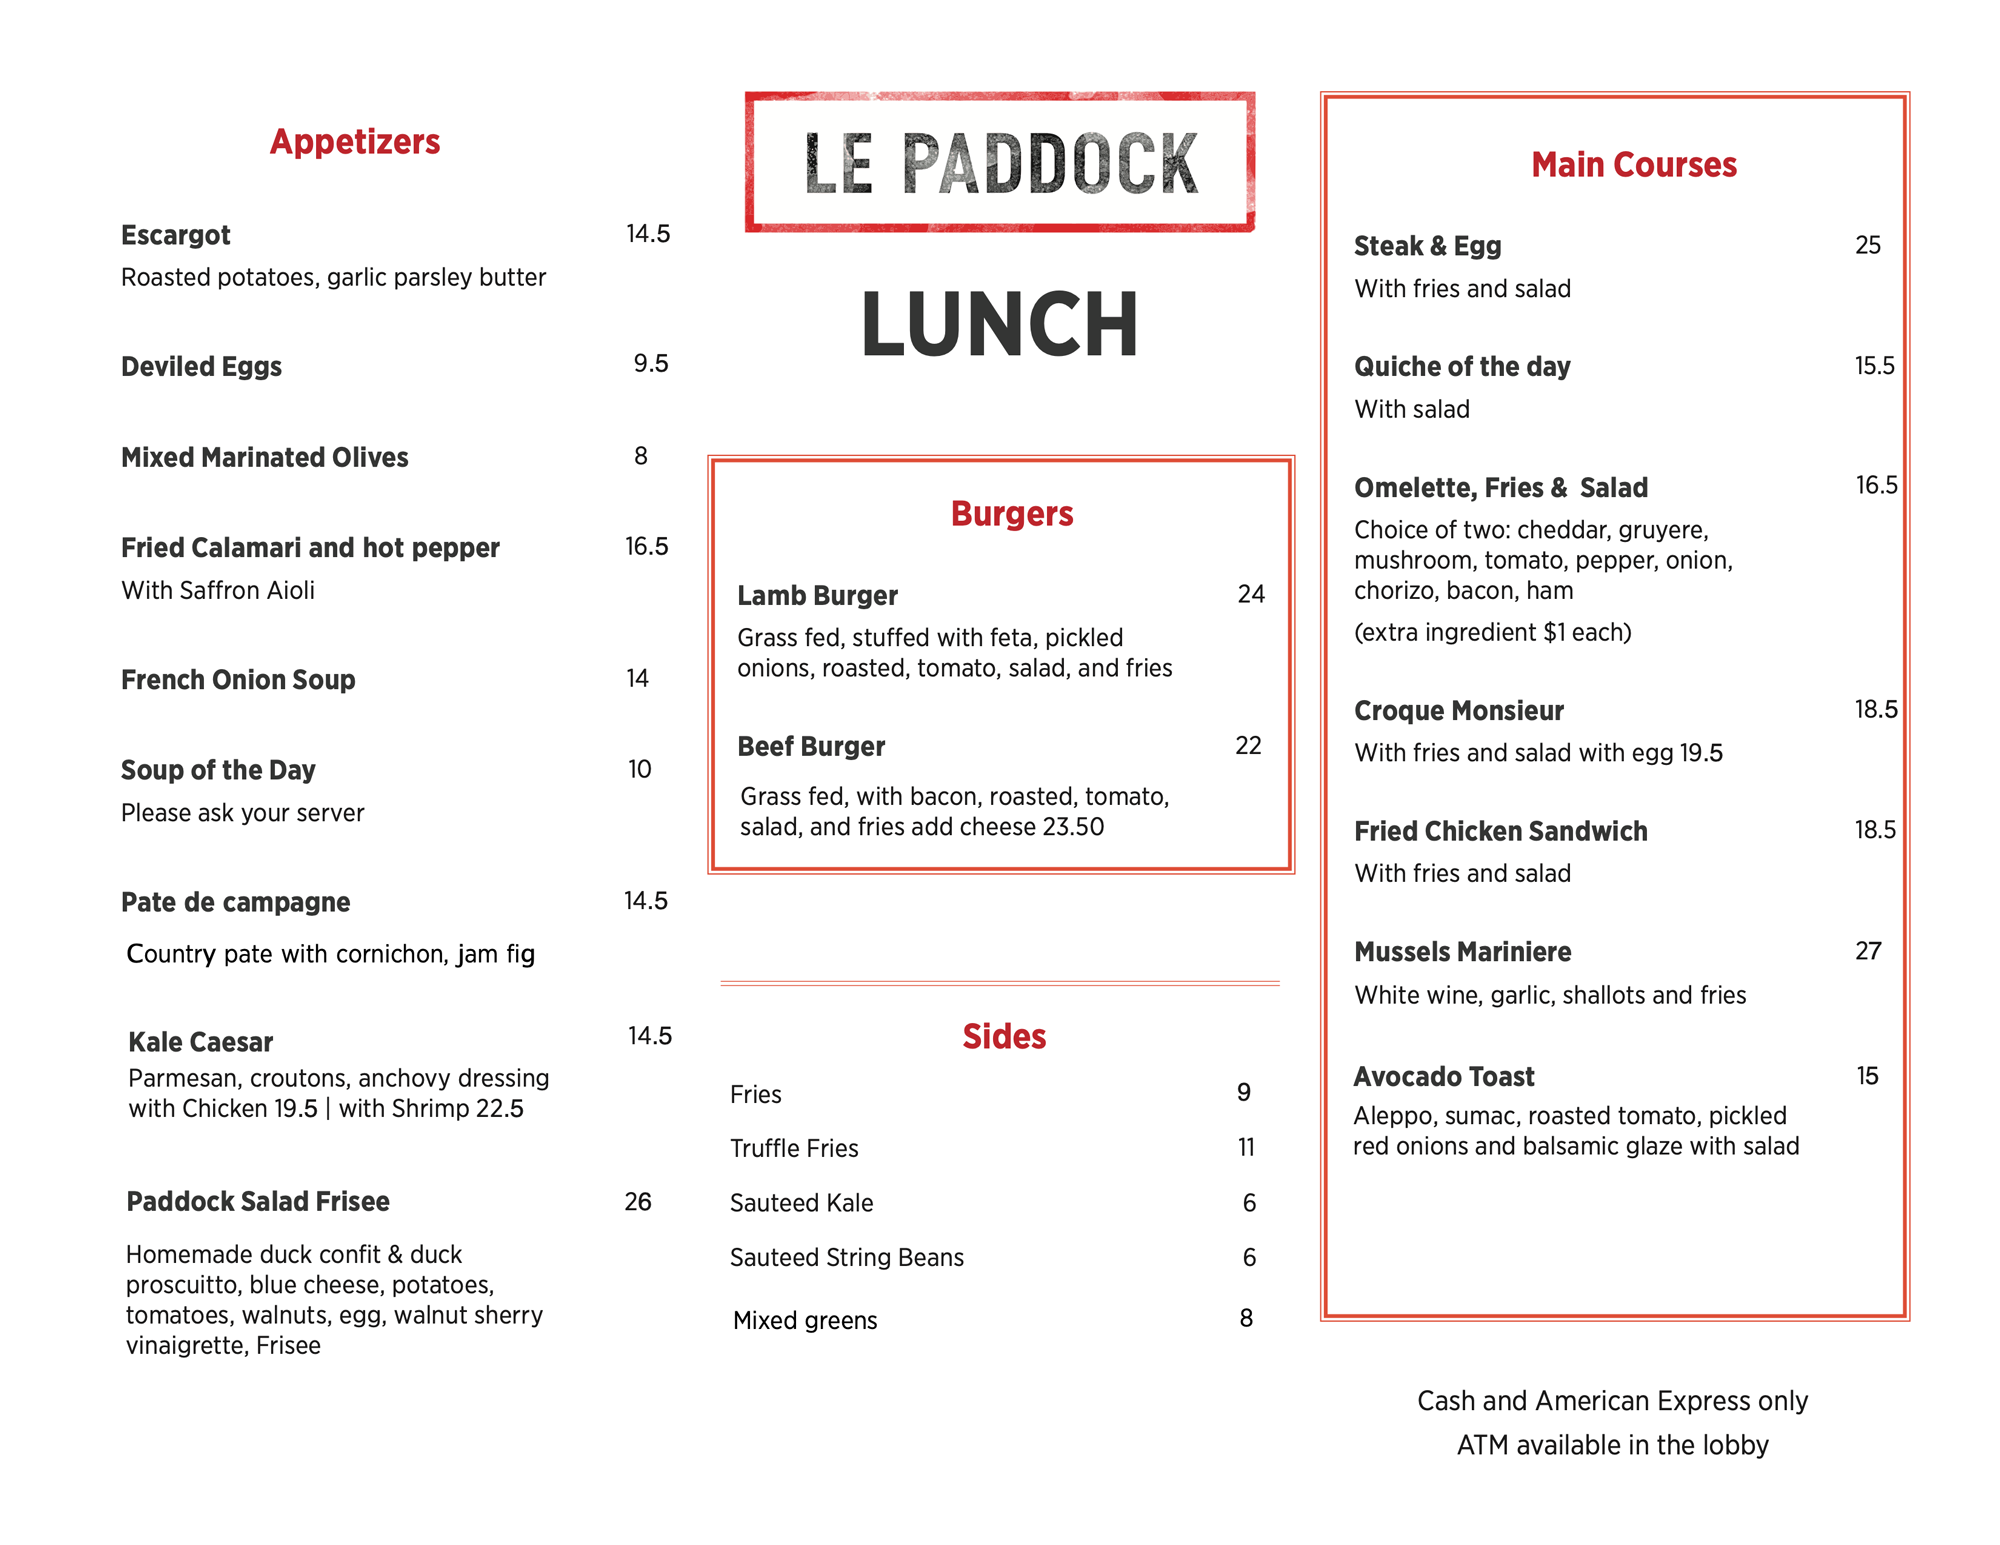 Here is our Lunch Menu